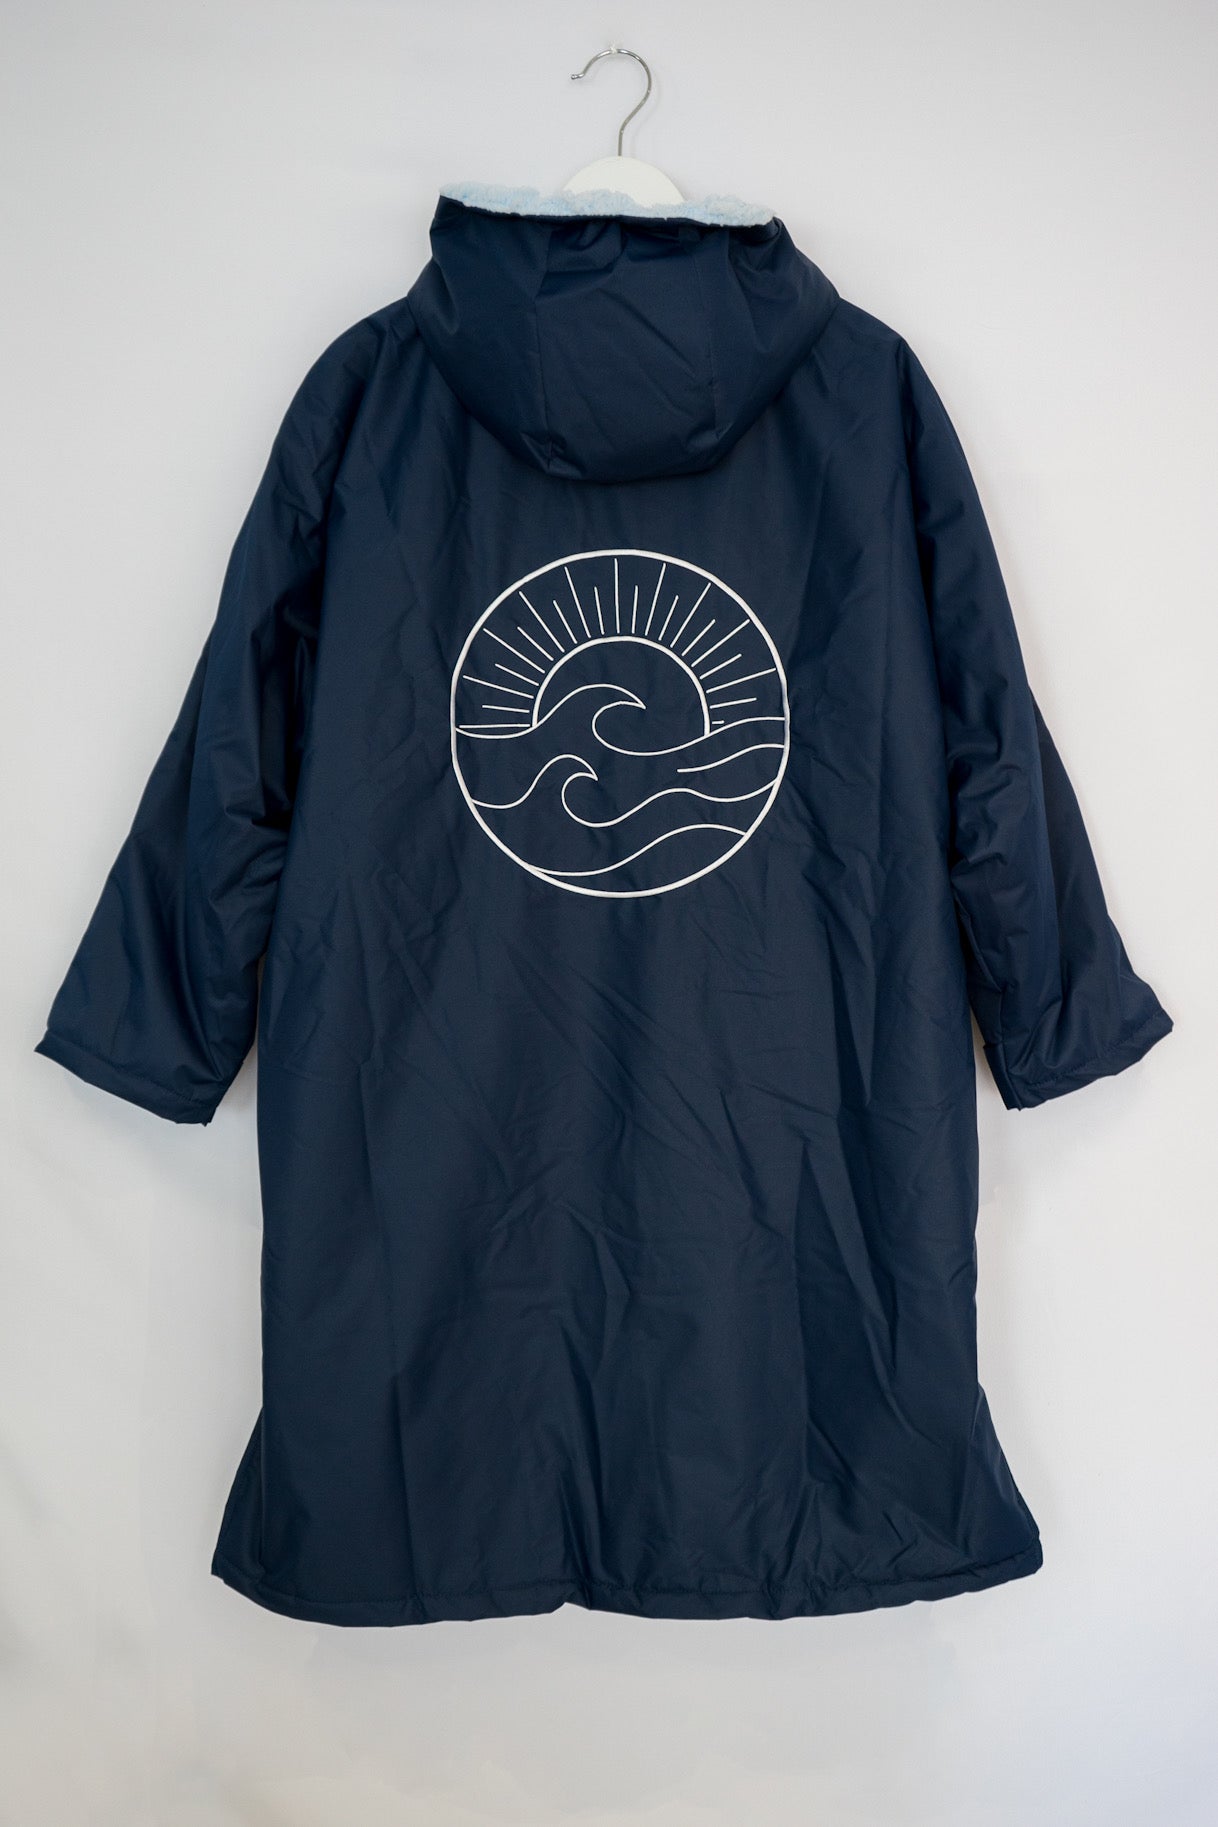 New Loose n' Lazy Changing Robe - Navy Blue/Sky Blue